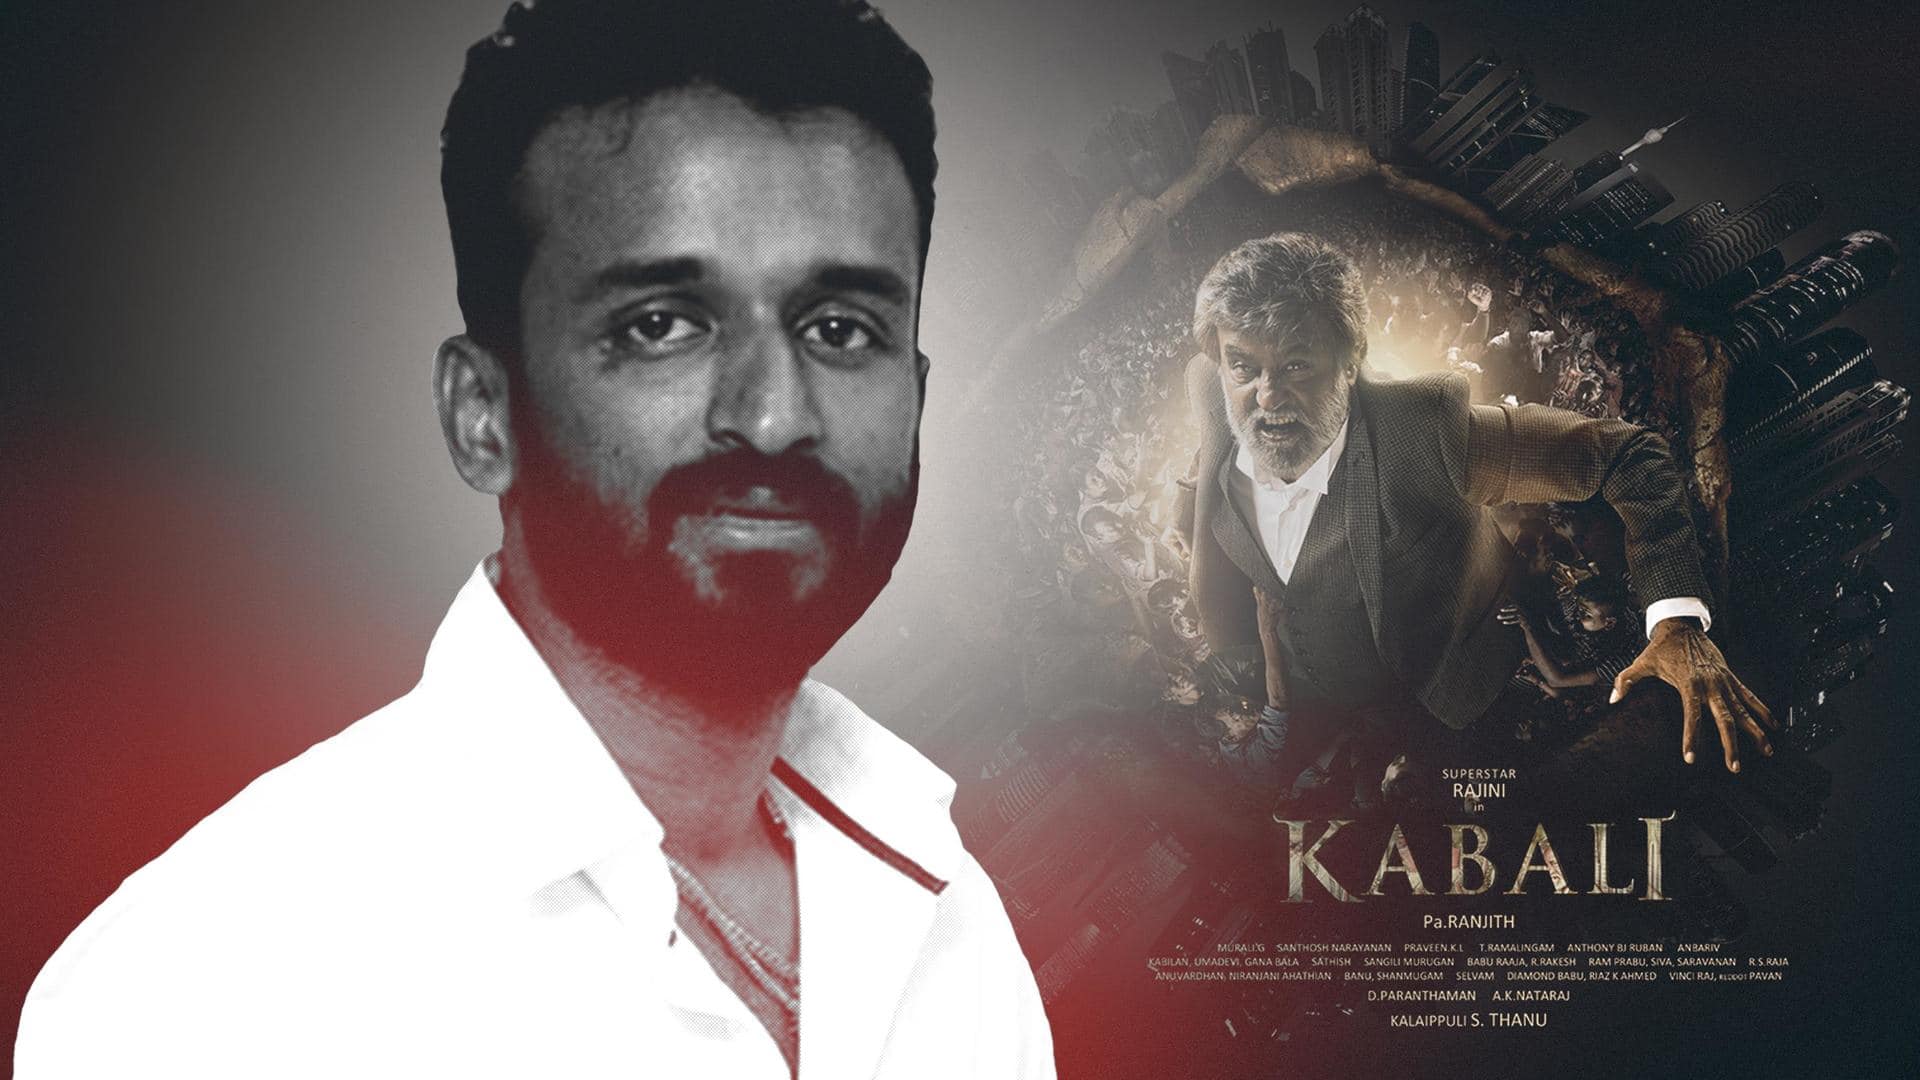 'Kabali' producer KP Chowdary arrested over possession of drugs